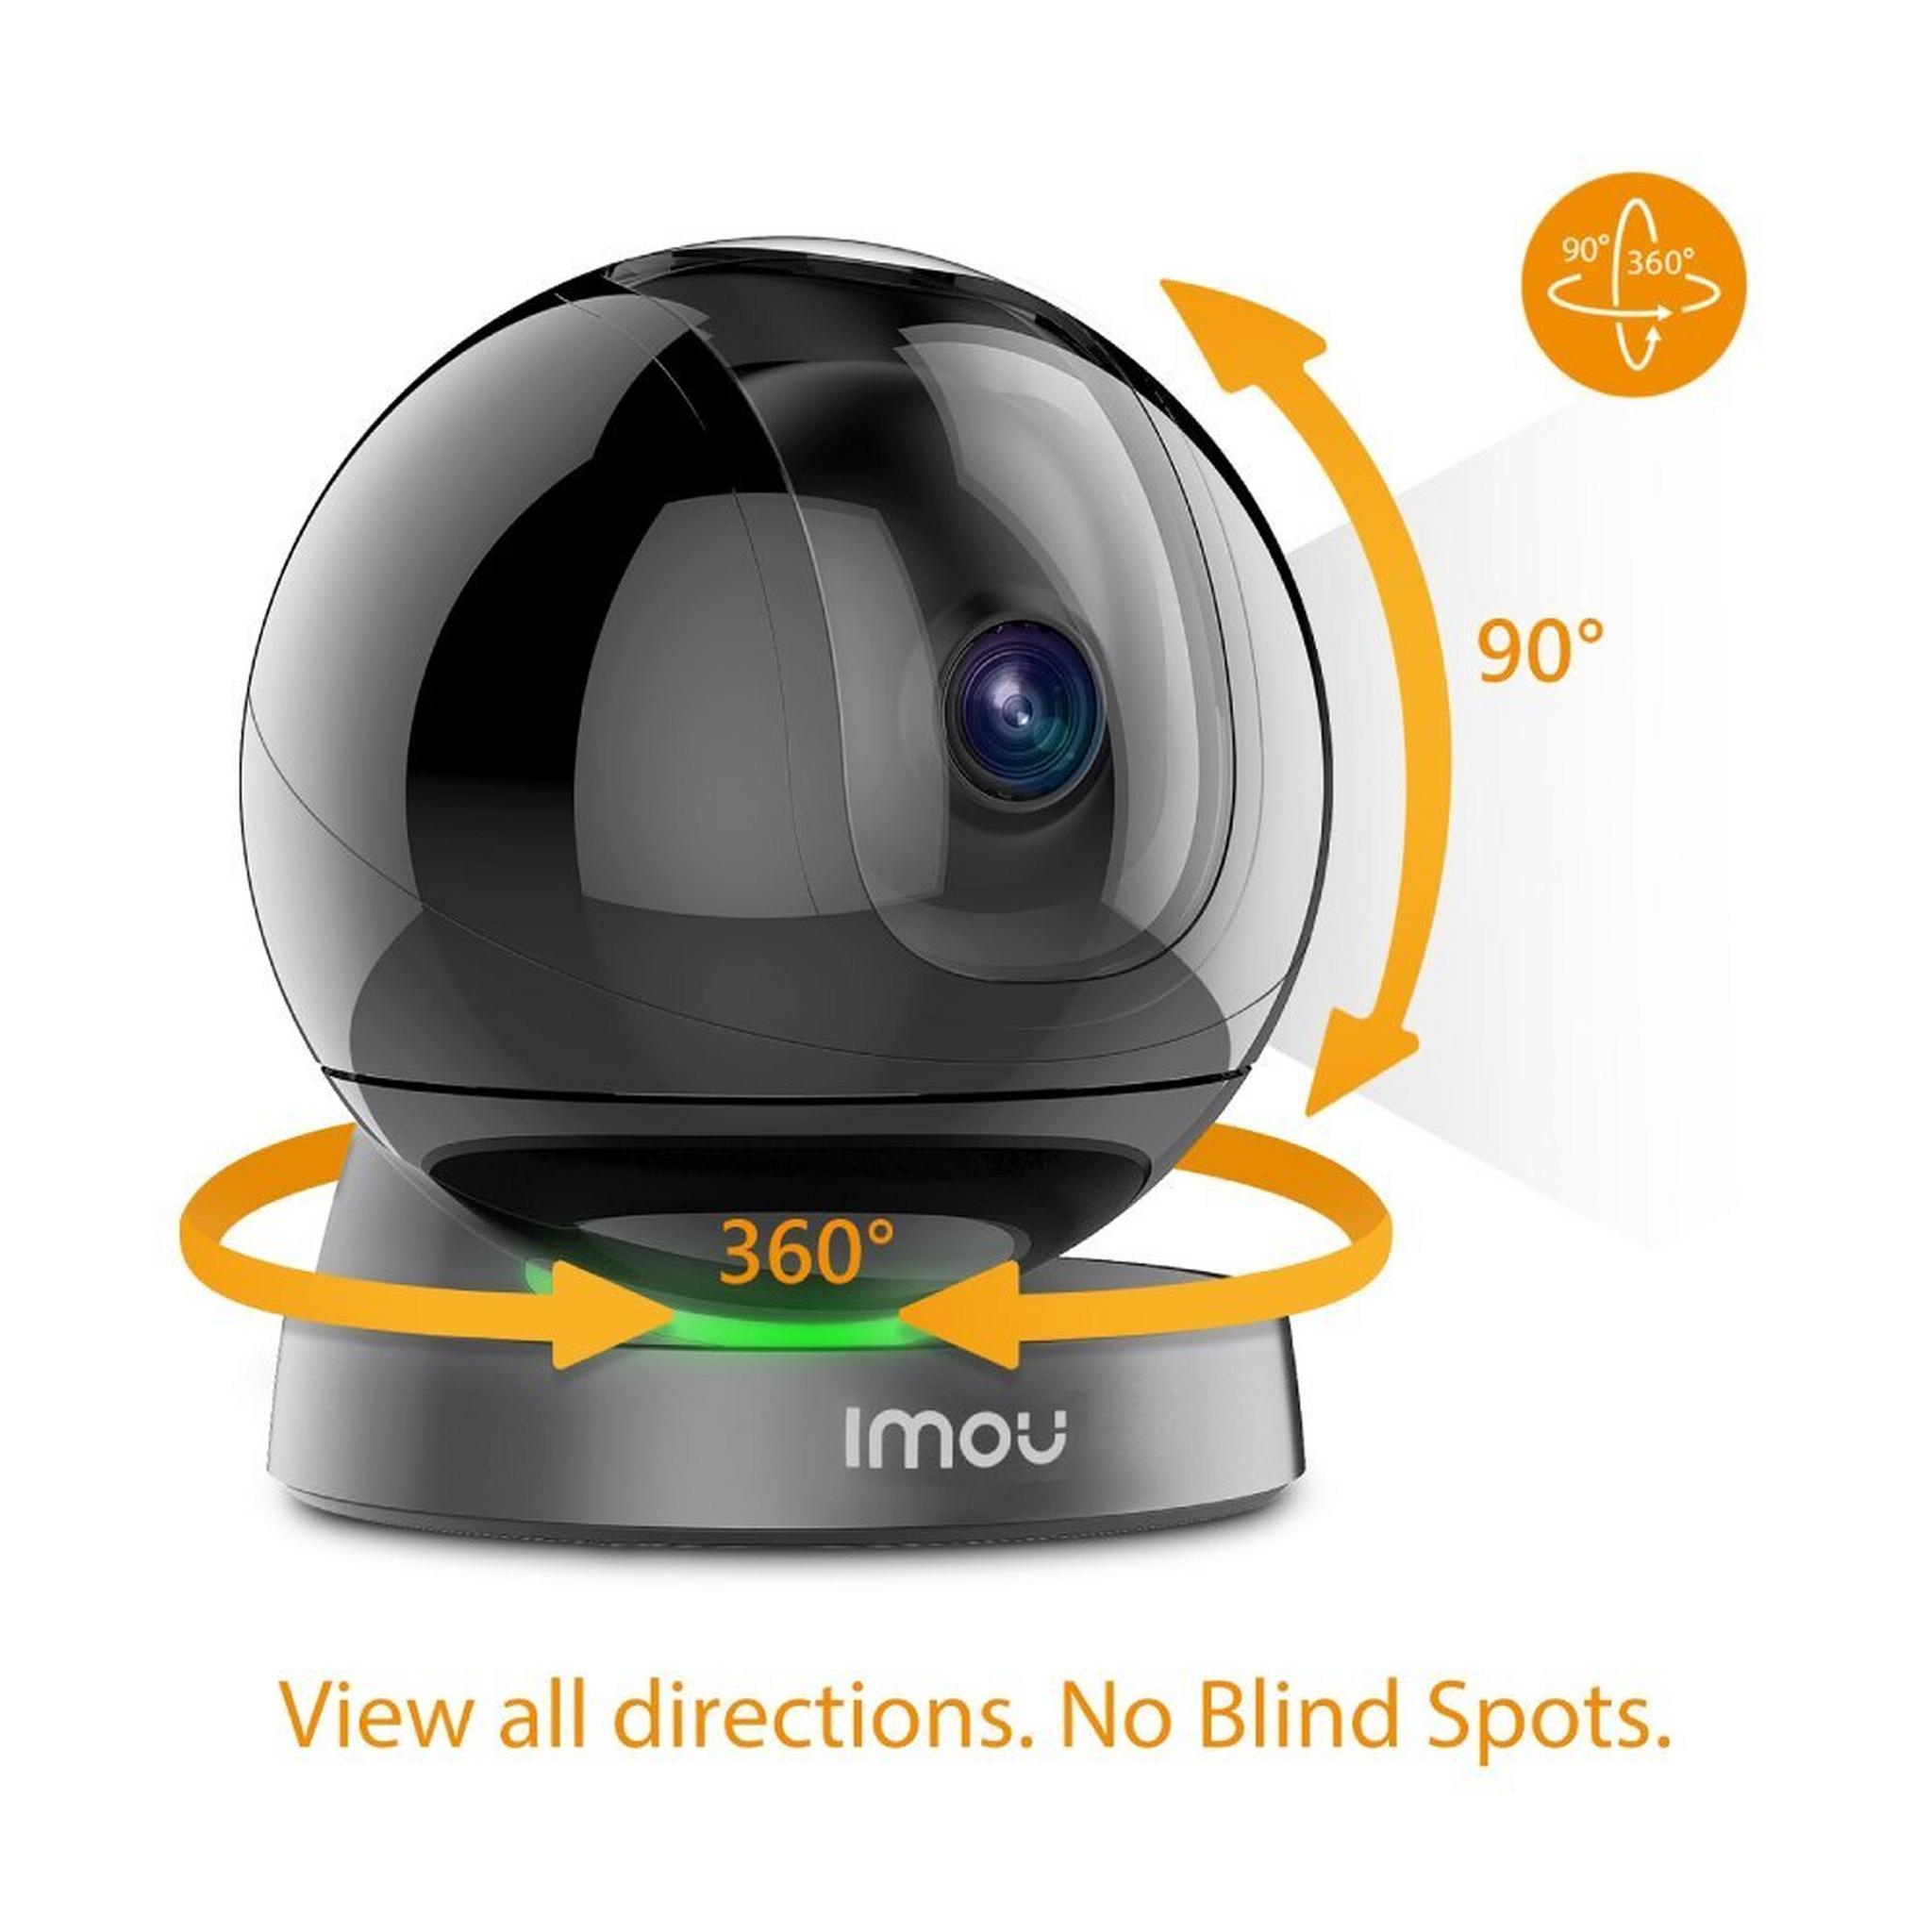 Imou Home Security Camera 2MP Indoor Camera, Plug-in WiFi Camera, Night Vision